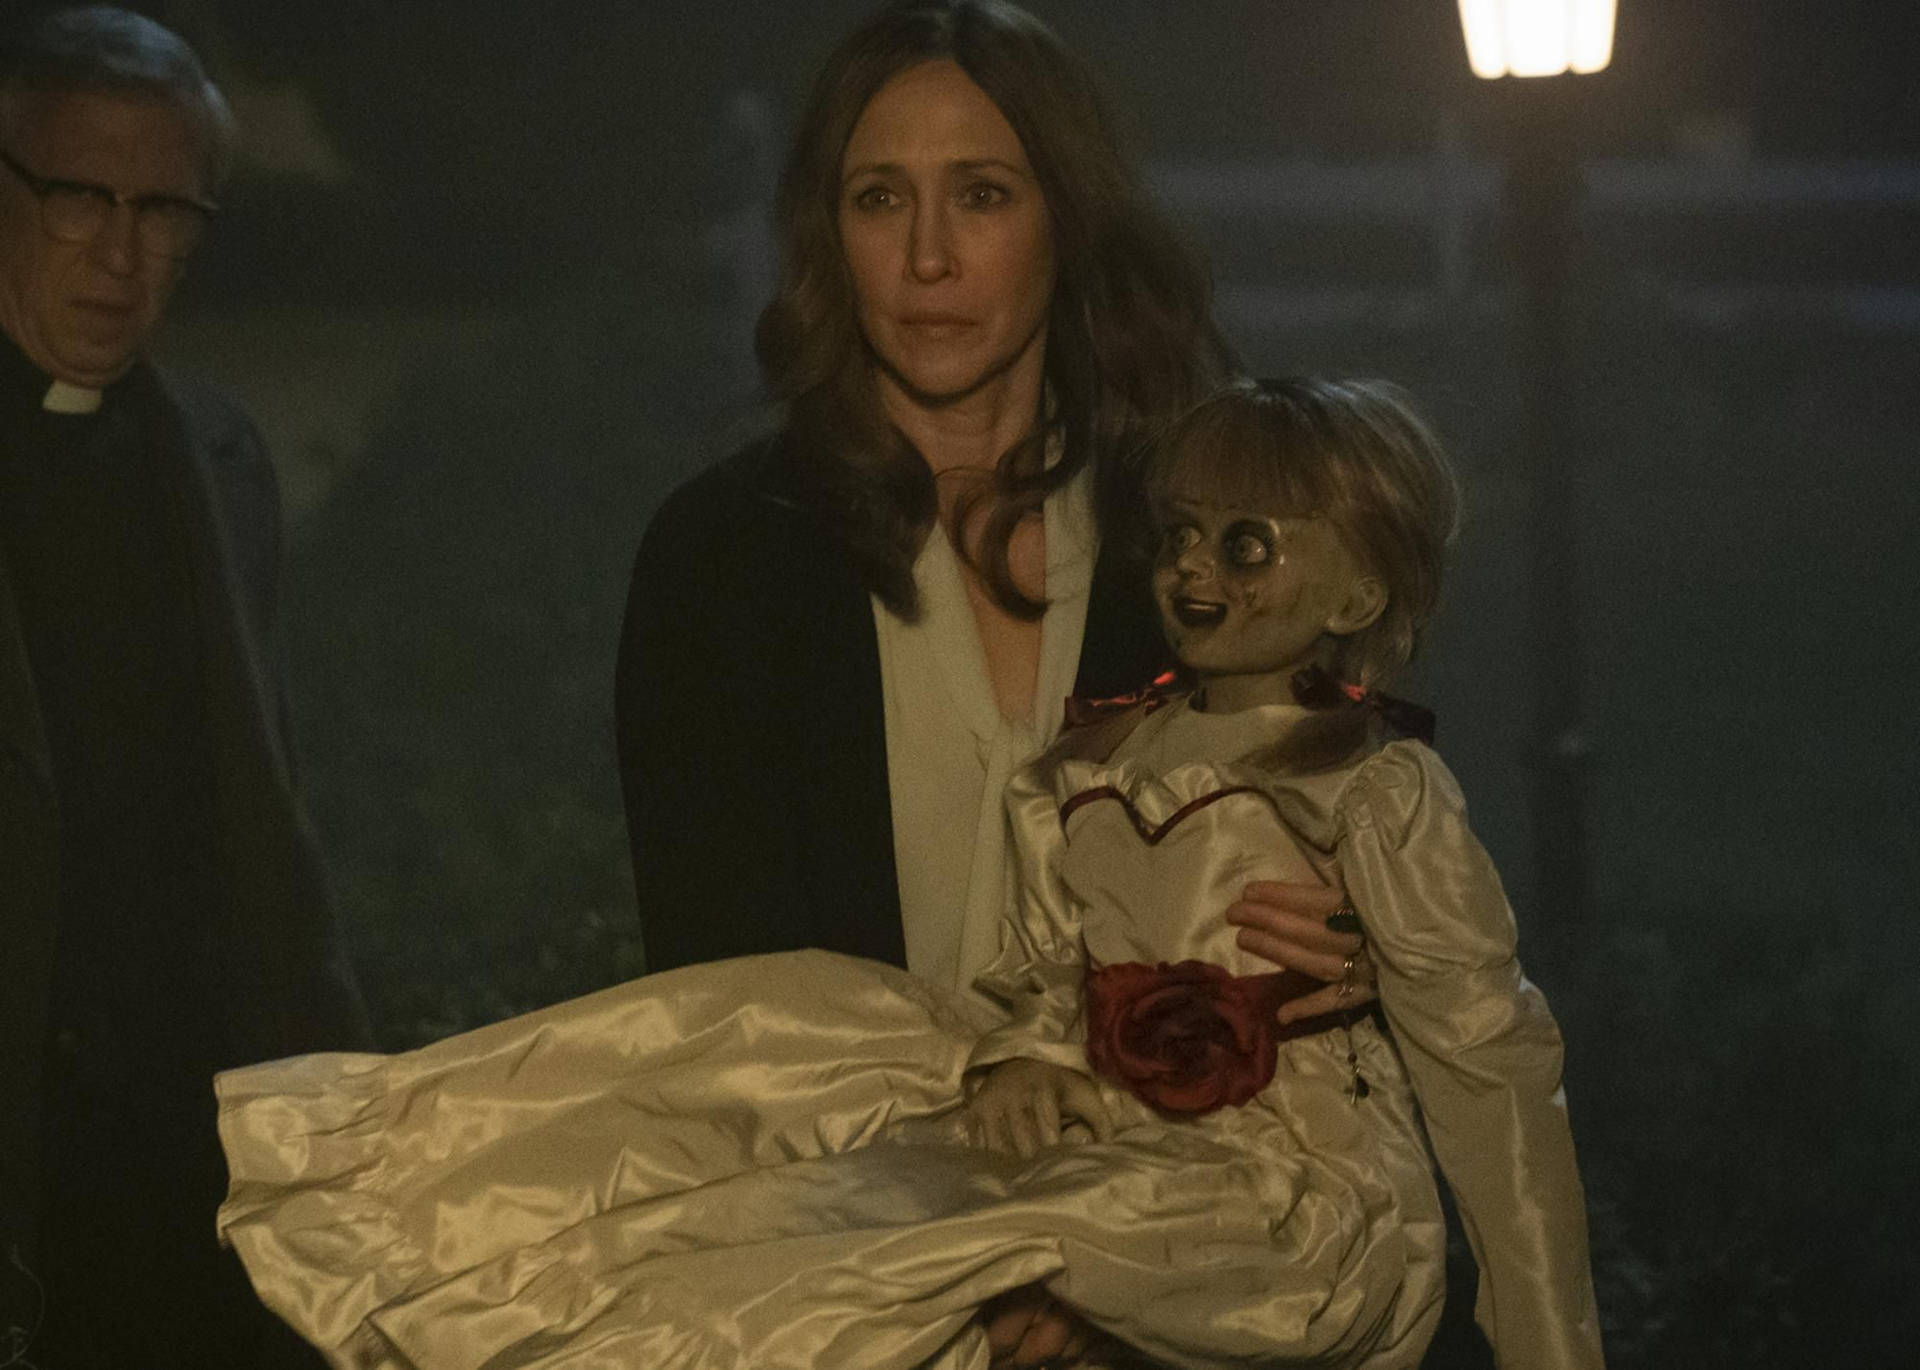 Theconjuring: Lorraine Tar Med Sig Annabelle. Wallpaper